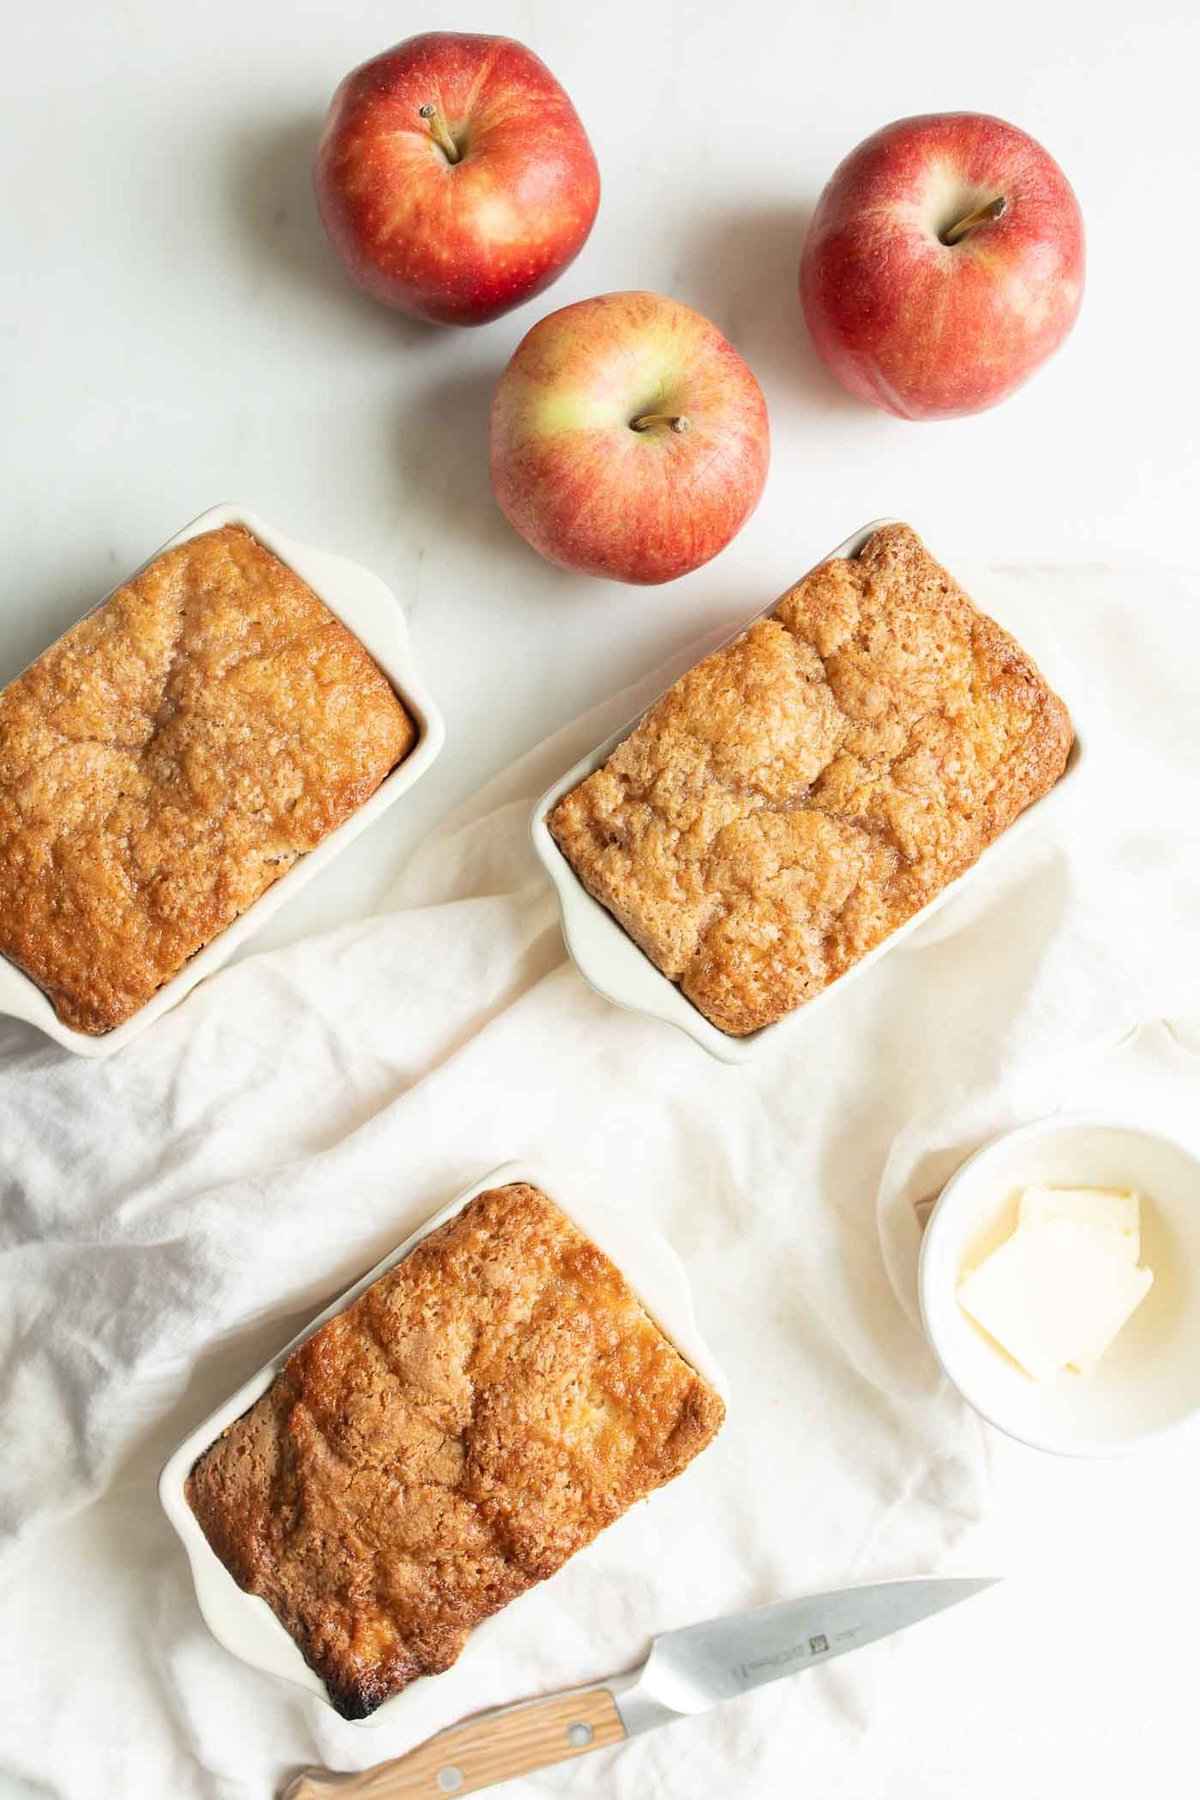 Three small ceramic loaf pans filled with apple bread, with apples in the background